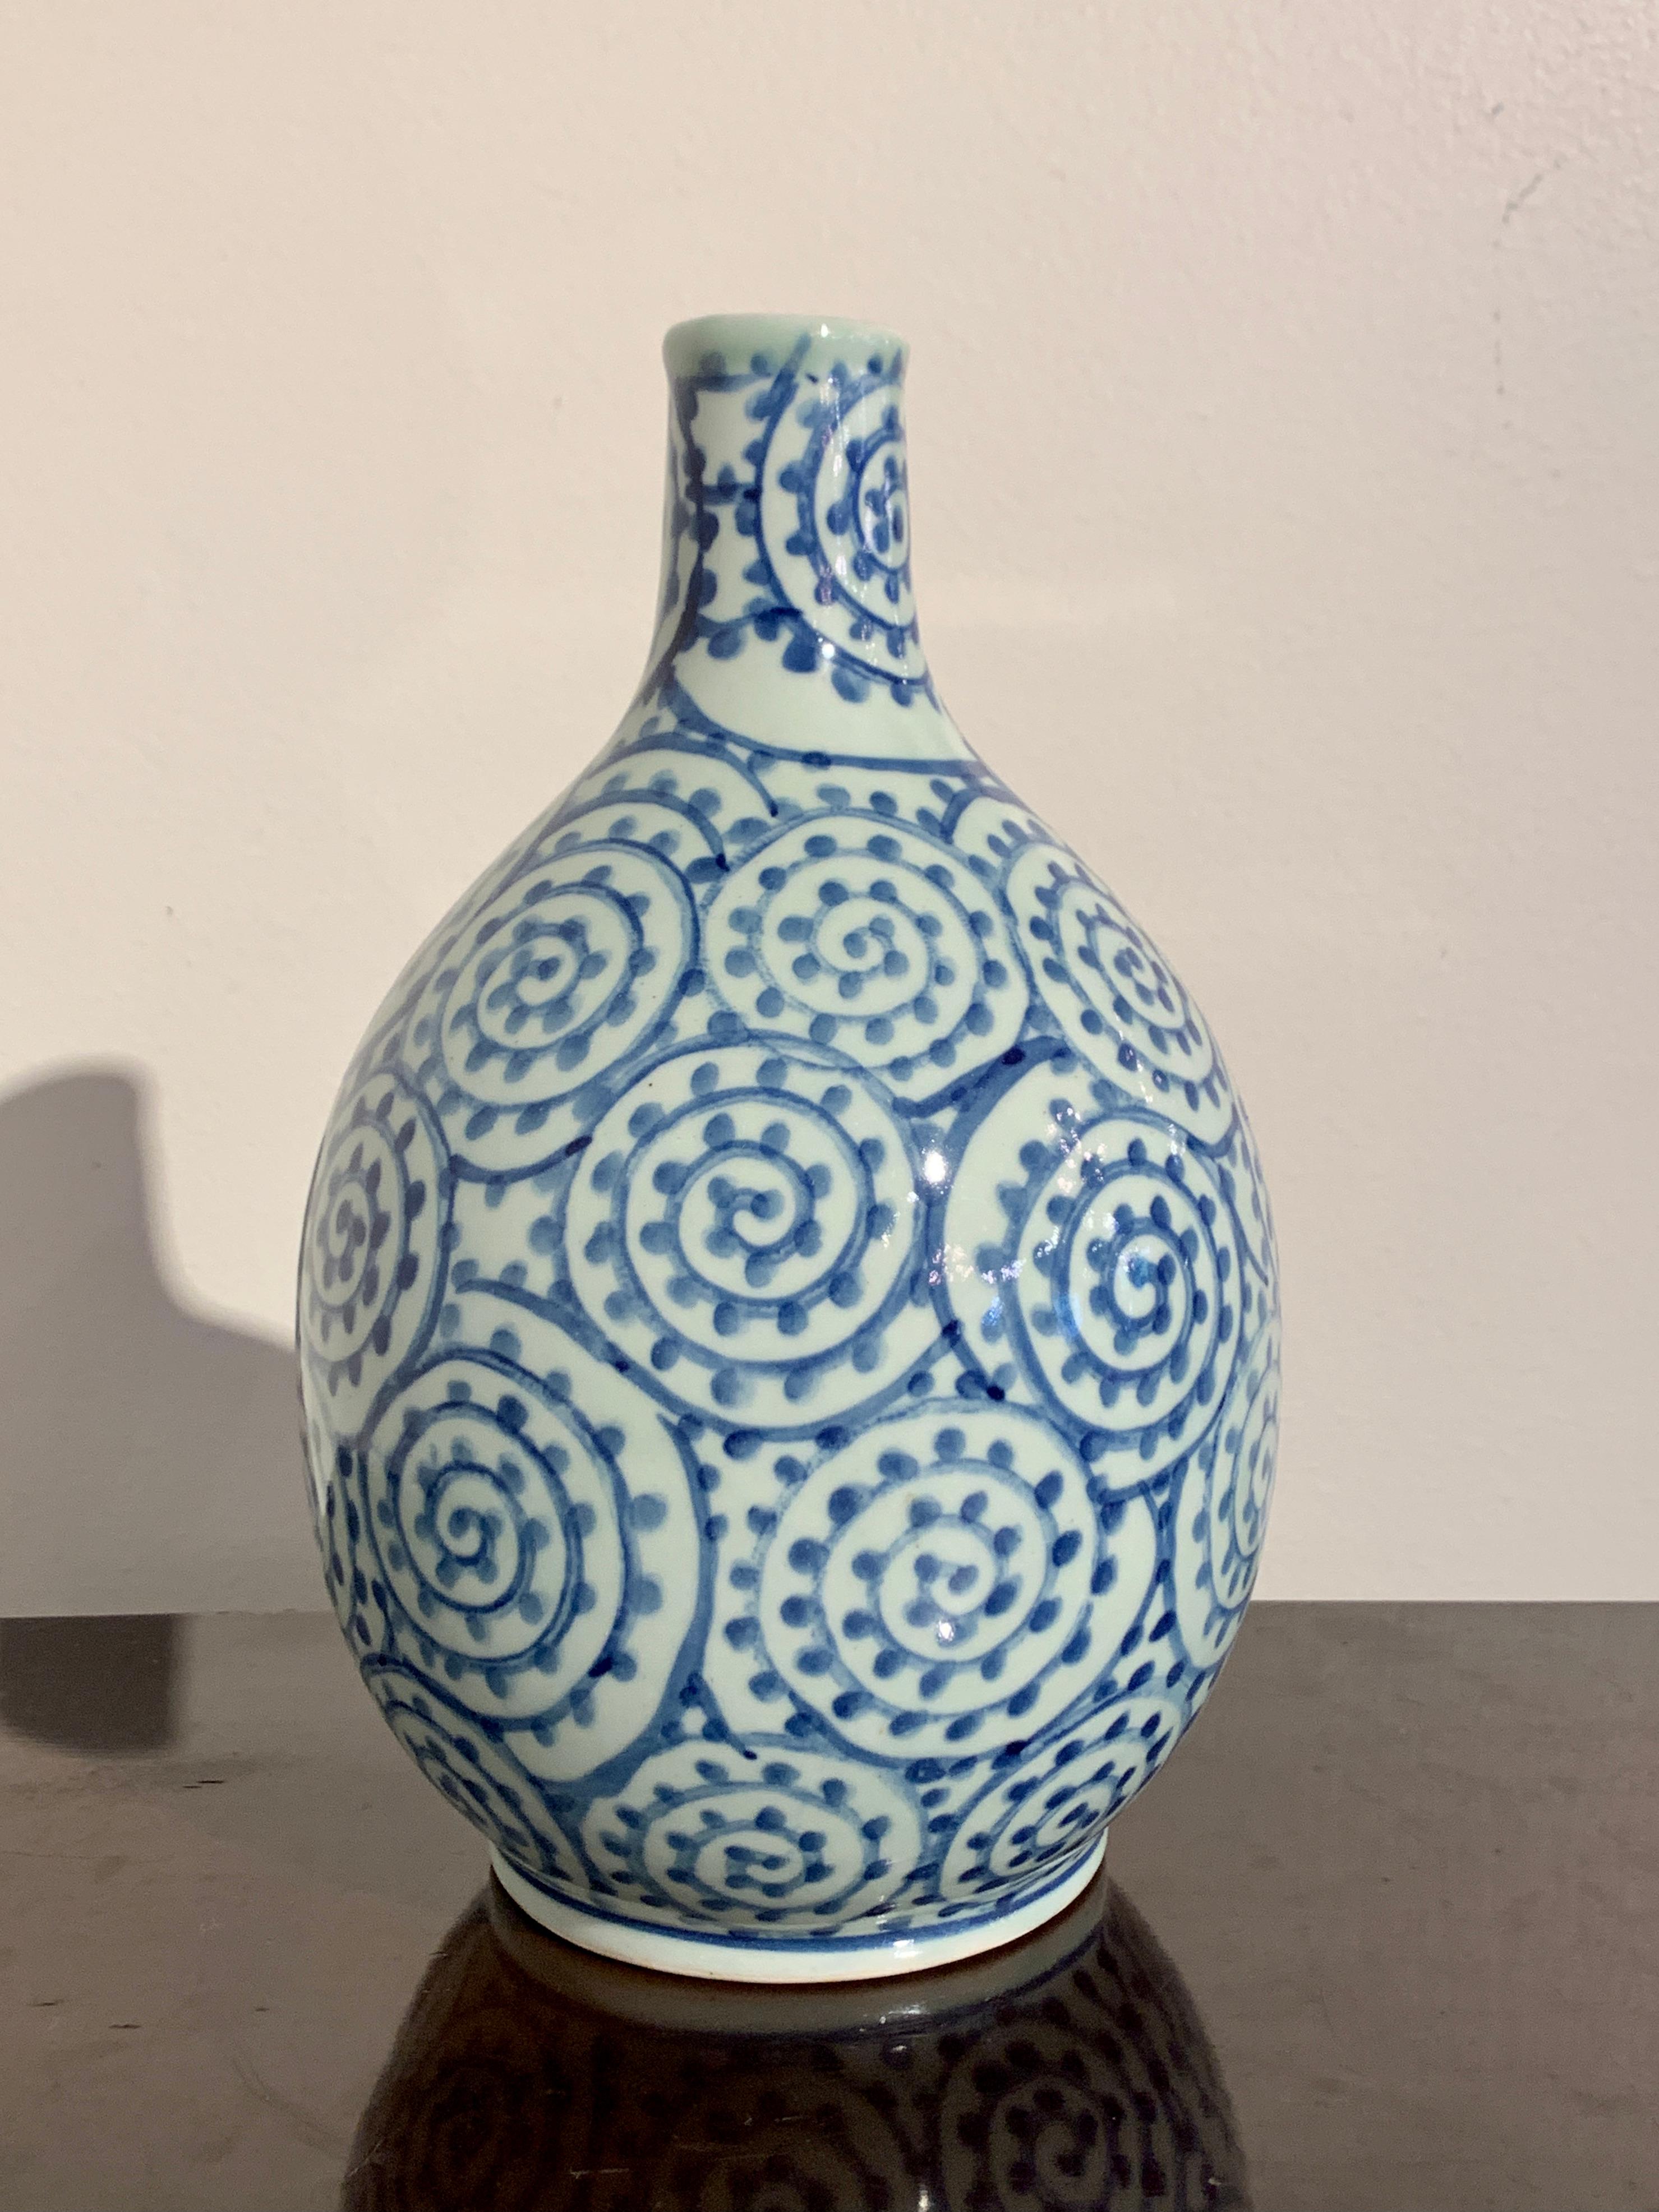 A fine and graphic Japanese blue and white glazed porcelain tako karakusa bottle vase, Arita ware, Showa Era, early to mid 20th century, Japan.

The vase of bottle or flask form, possibly originally for sake, with a wide and bulbous body and